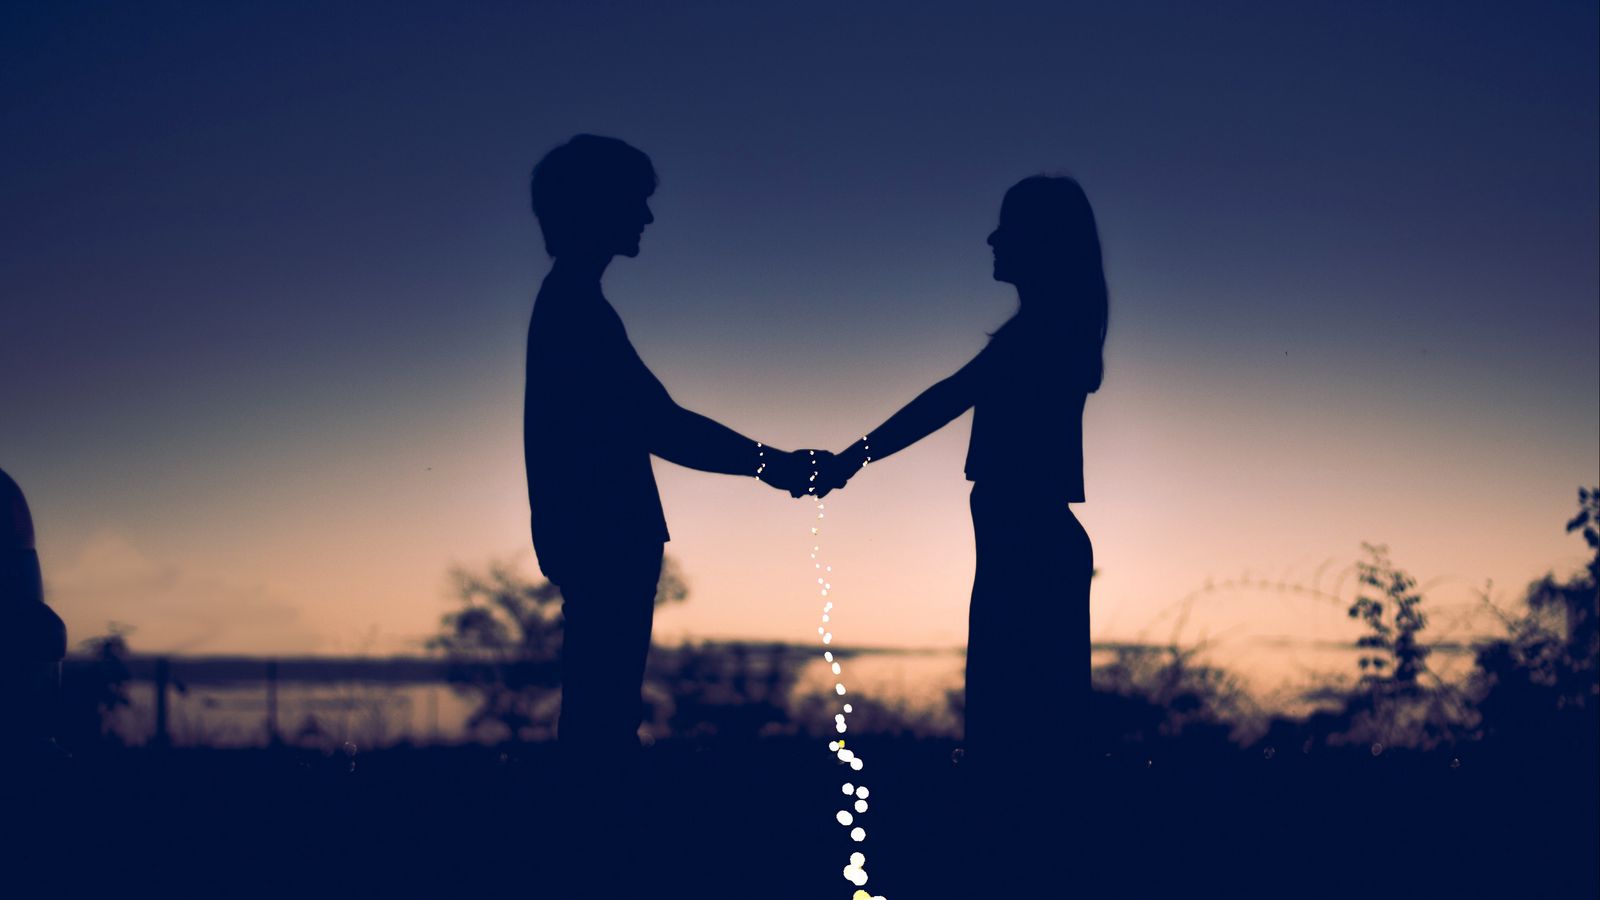 Download wallpaper 1600x900 couple, love, silhouettes, happiness widescreen  16:9 hd background